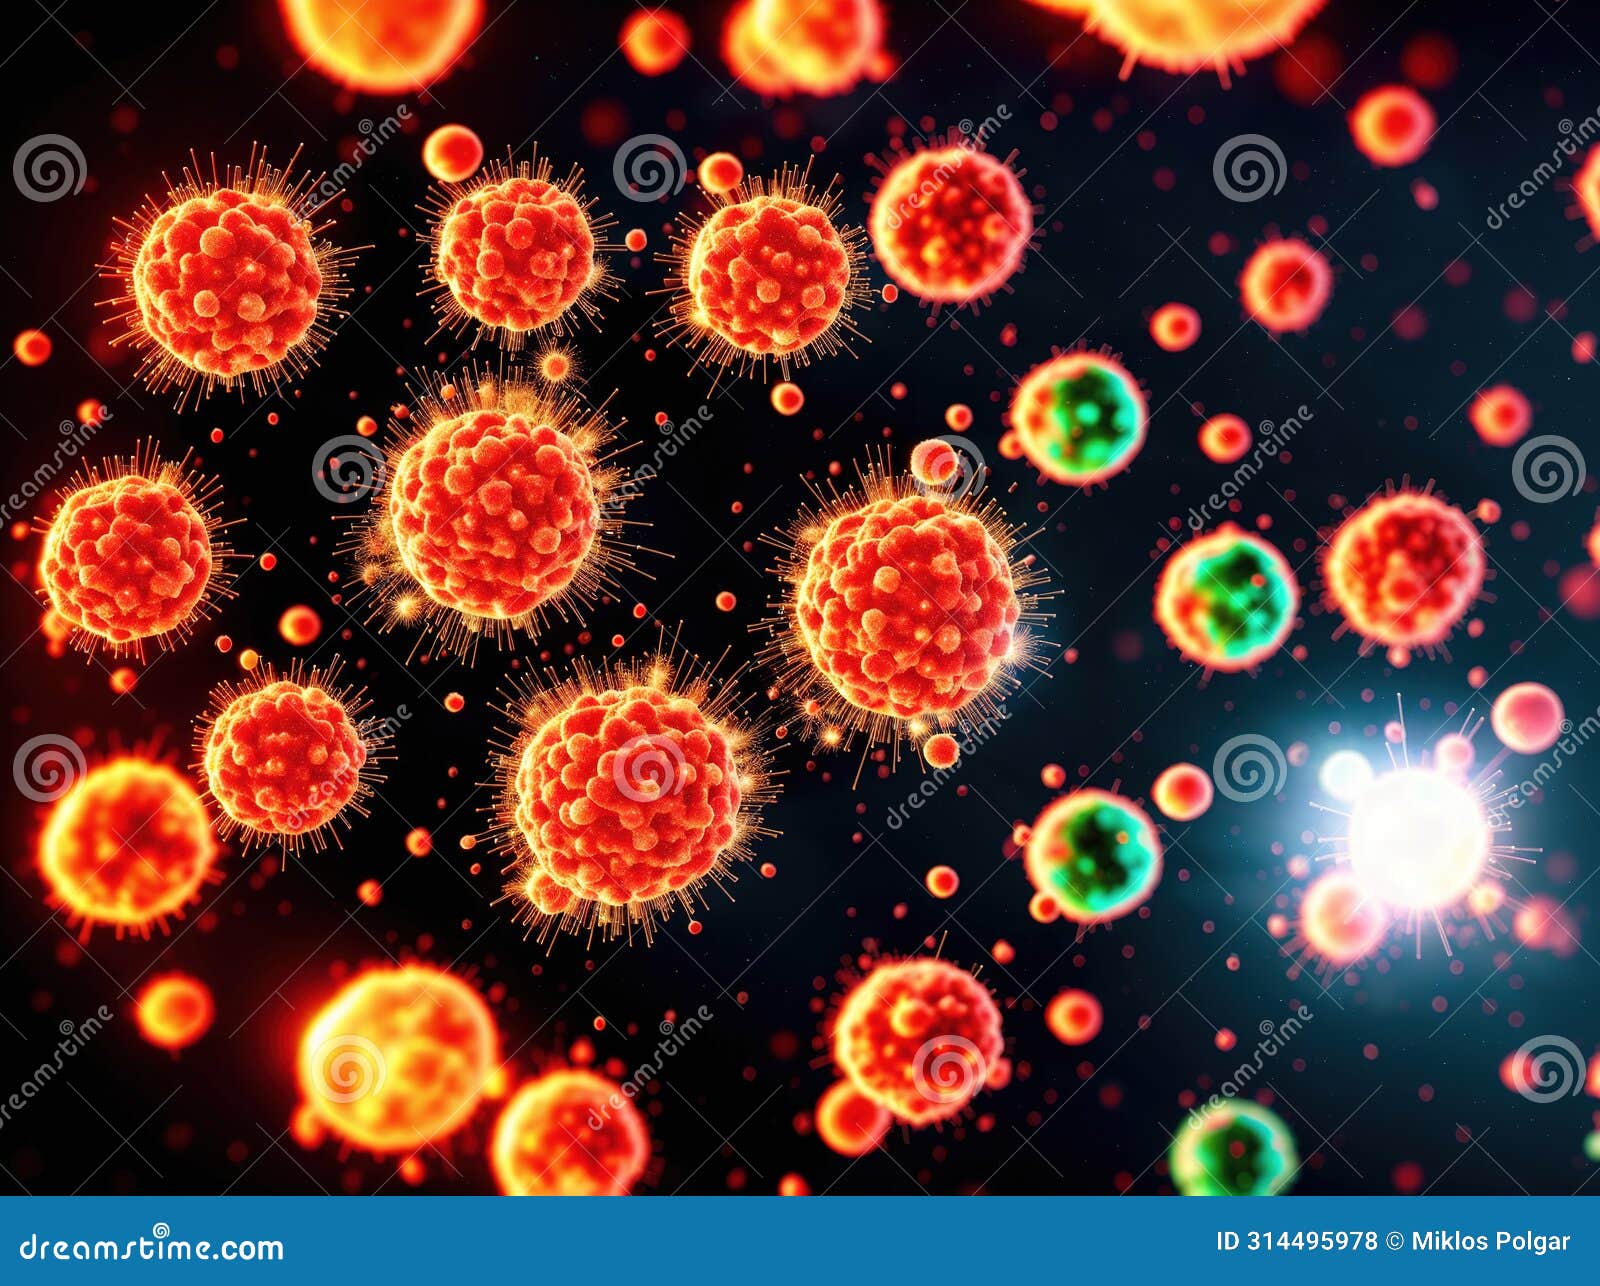 a group of cancer cells, each with a nucleus and cytoplasm.